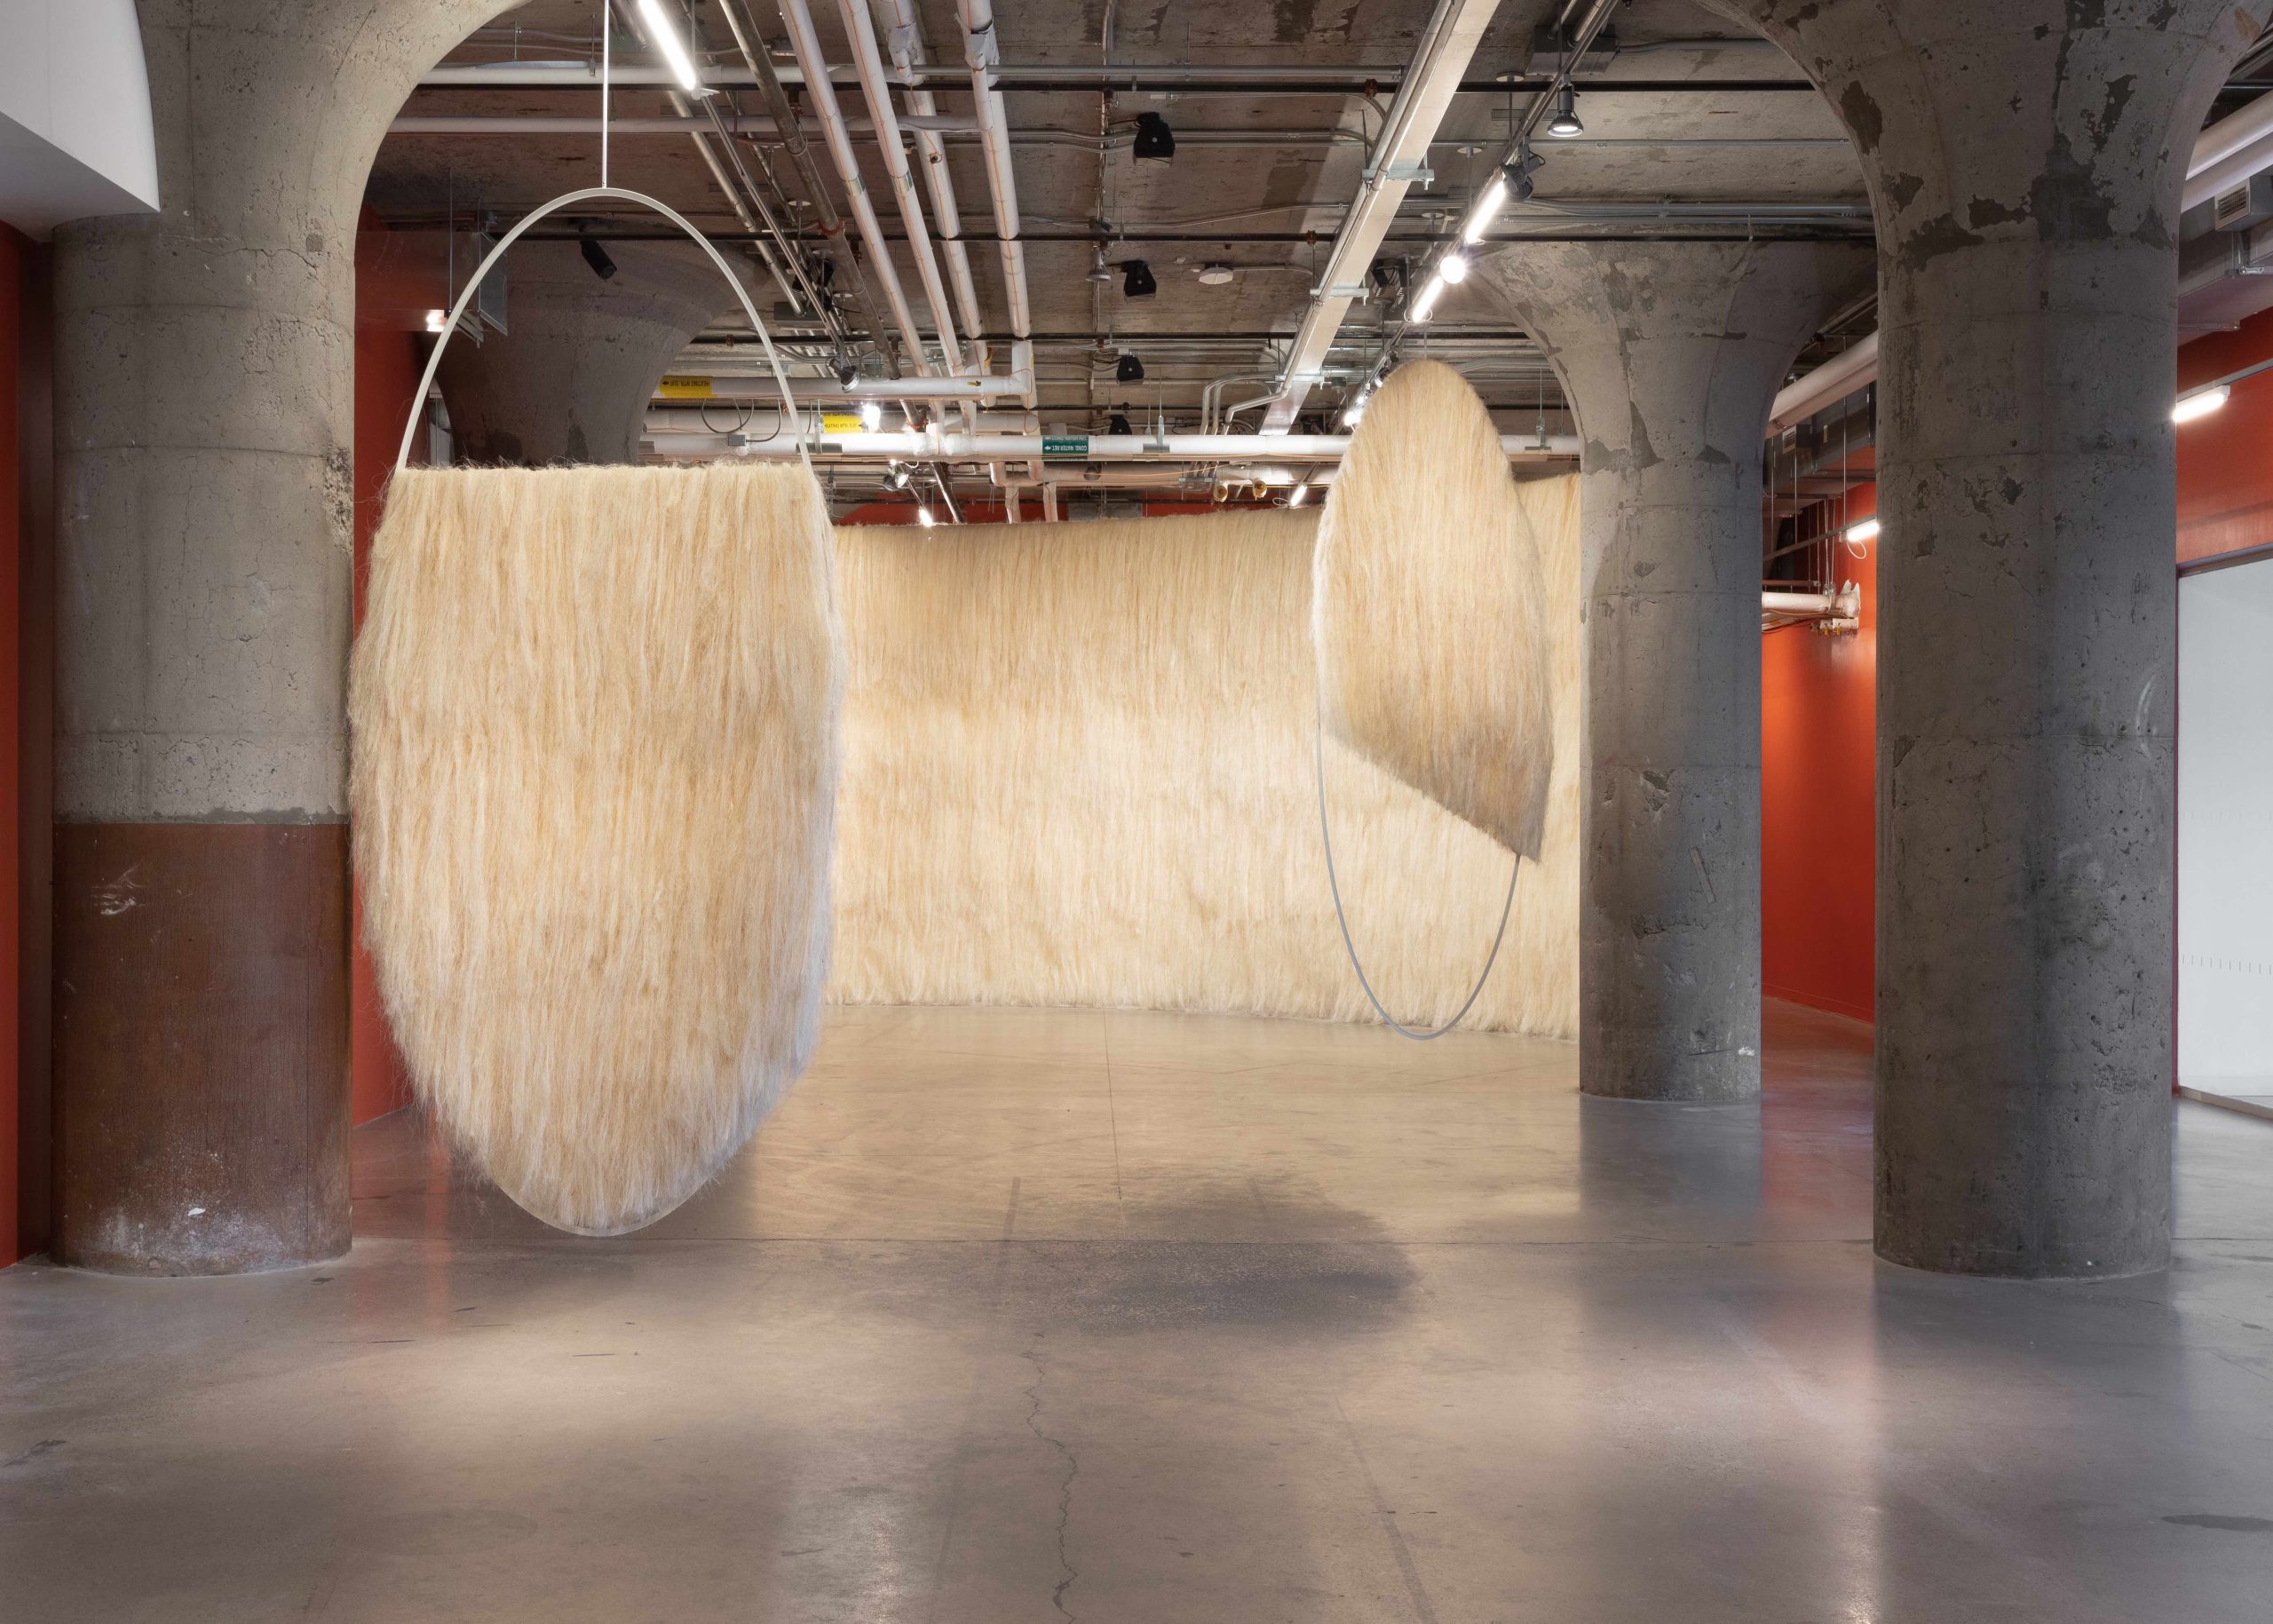 The large-scale installation Elliptical Field by Kipwani Kiwanga including two metal circles hanging from the ceiling, adorned with cream-coloured sisal fibre. The circles are set against a larger sisal fibre background in the same hue.